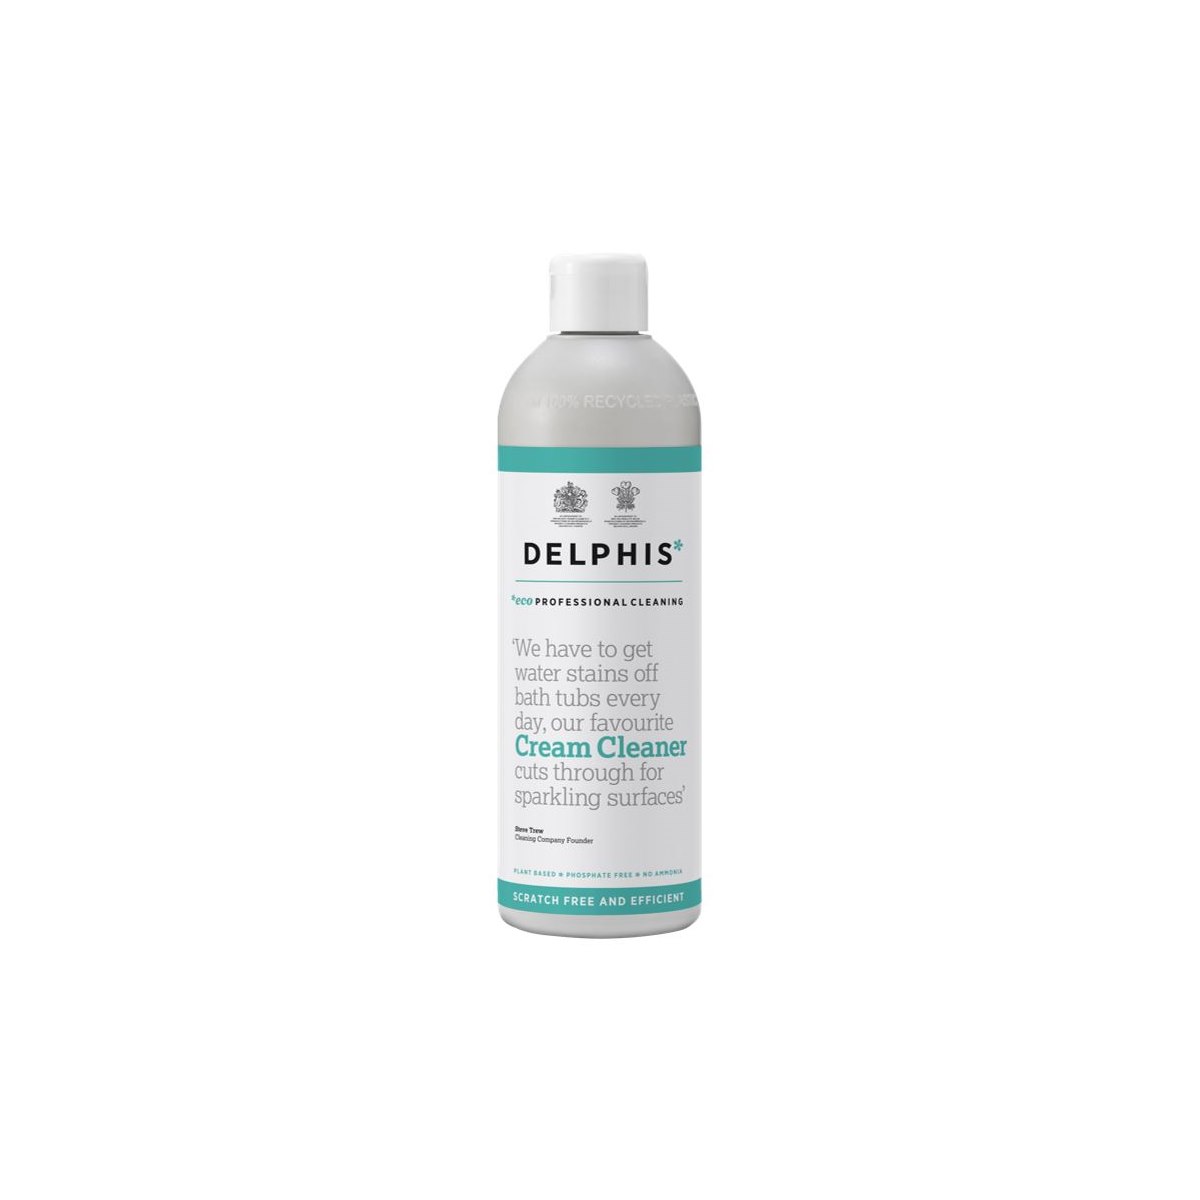 How too Use Delphis Cream Cleaner